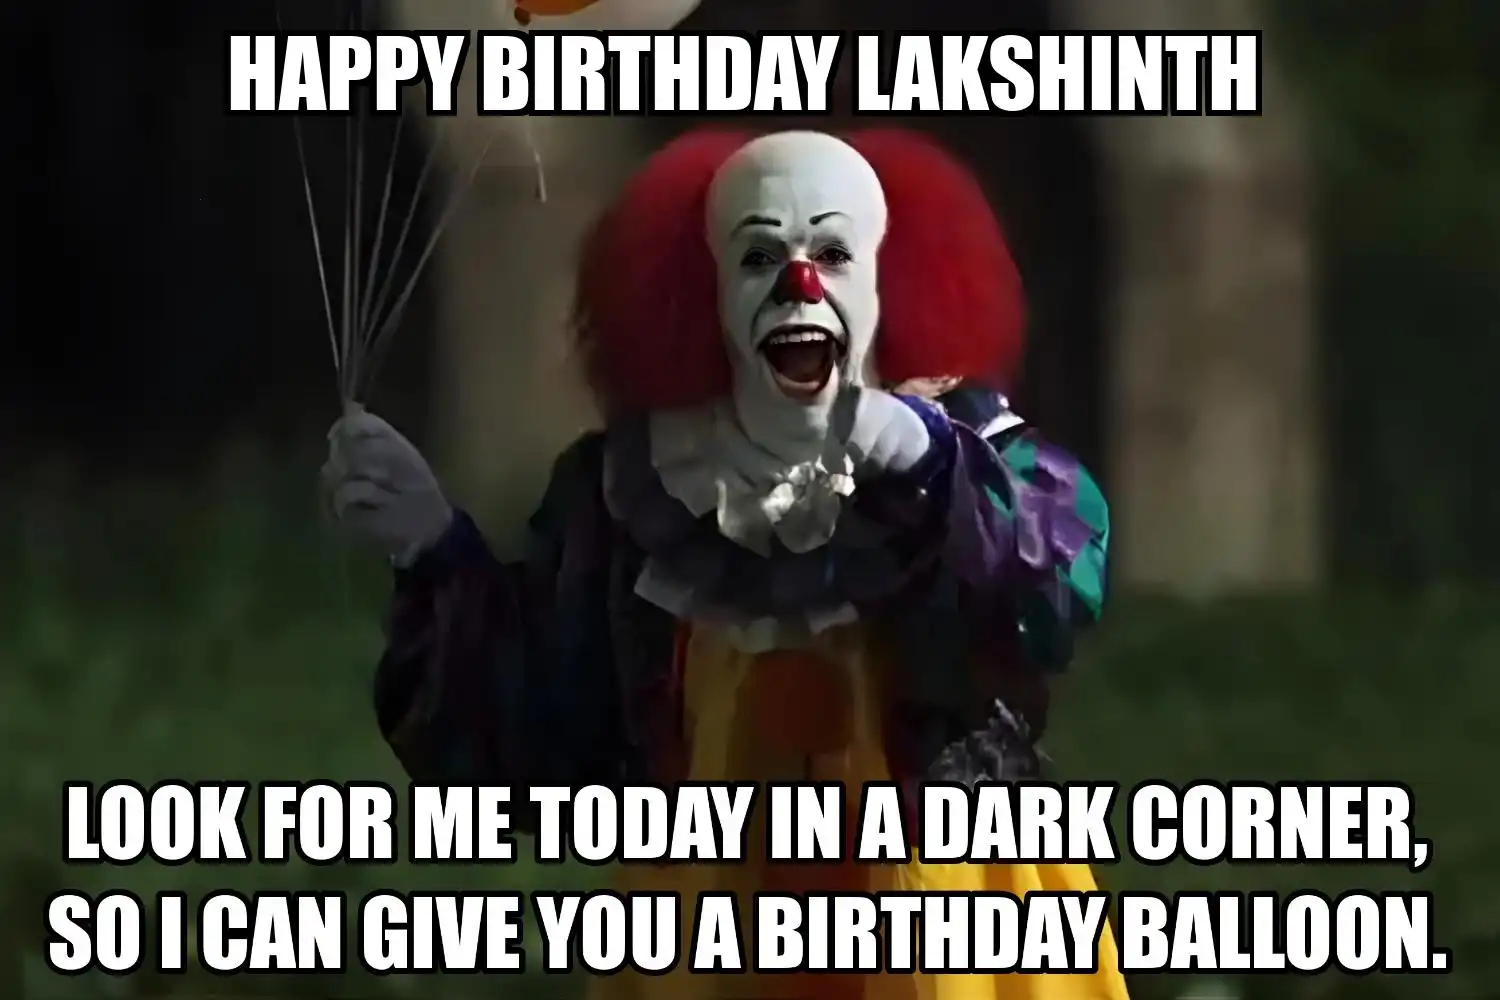 Happy Birthday Lakshinth I Can Give You A Balloon Meme